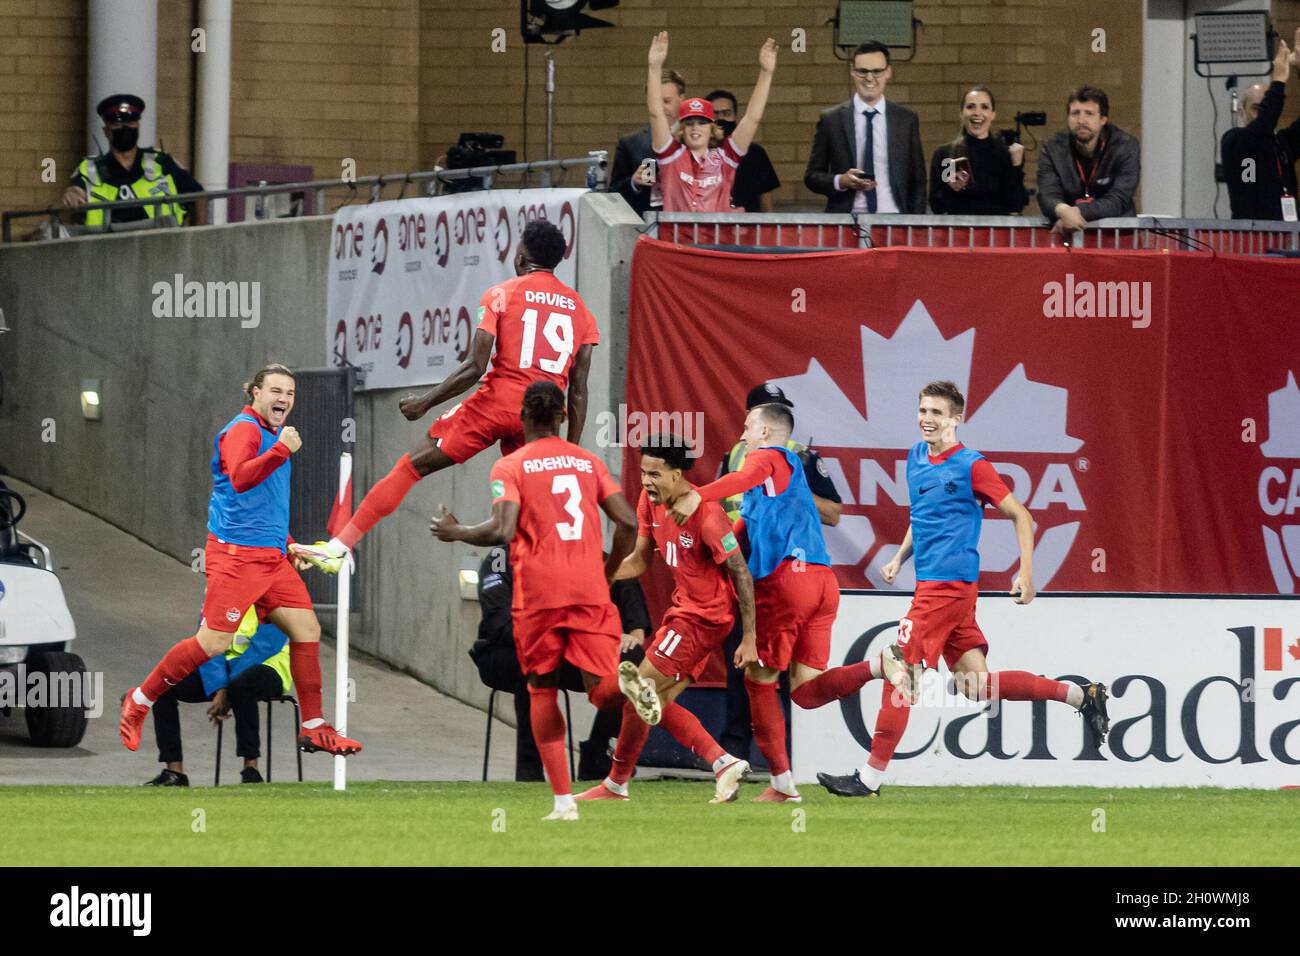 Toronto, Canada. 13th Oct, 2021. Toronto, Canada, October 13, 2021: Alphonso Davies, No.19, and his teammates celebrate after scoring a goal against Team Panama during the CONCACAF FIFA World Cup Qualifying 2022 at BMO Field in Toronto, Canada. Canada won the match 4-1. Credit: Phamai Techaphan/Alamy Live News Stock Photo